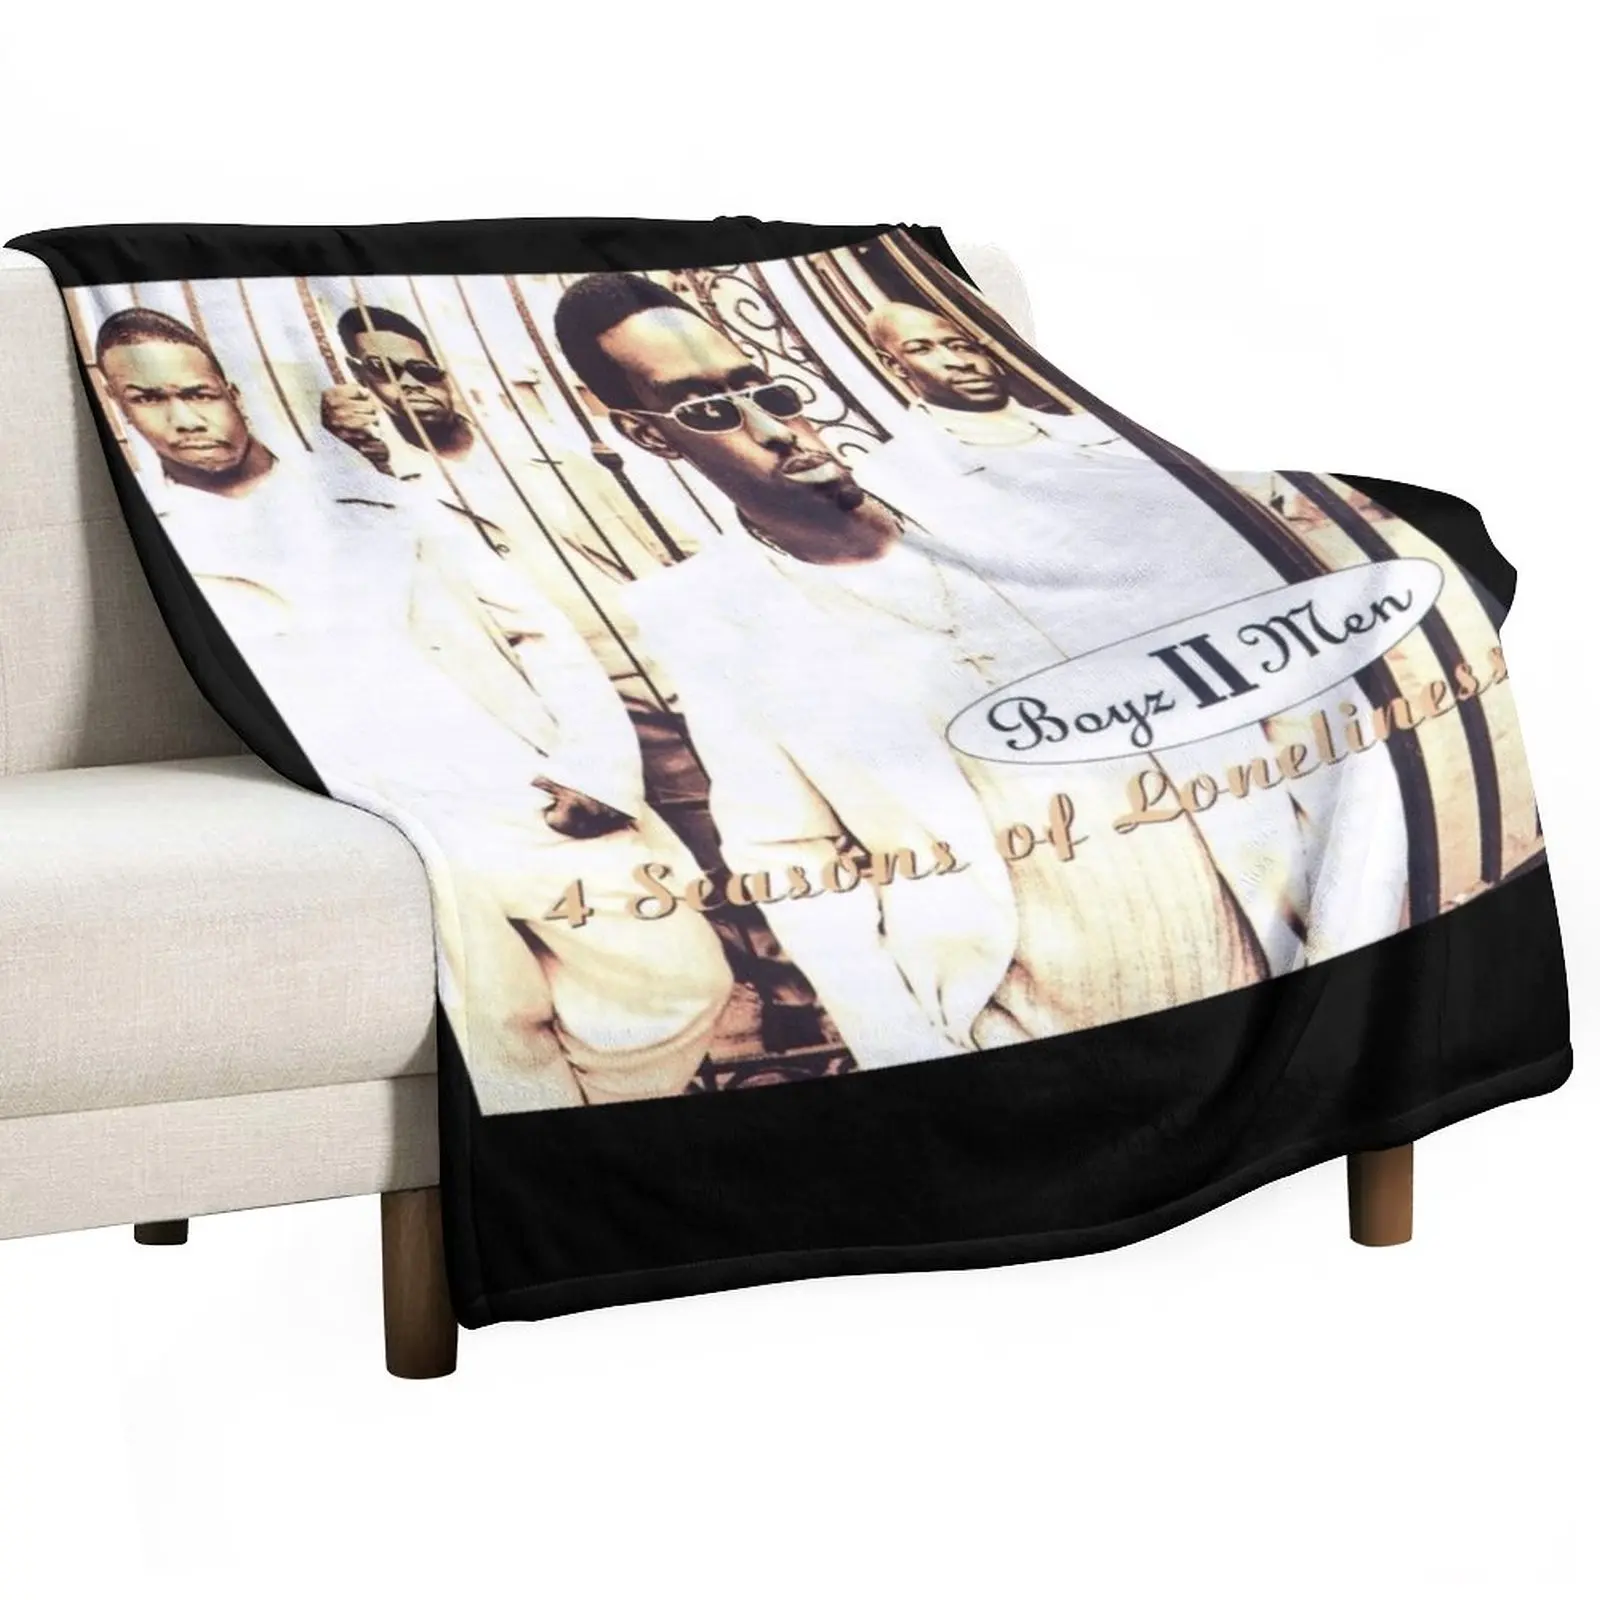 

4 seasons of loneliness Throw Blanket Vintage Blanket Fashion Sofa Blankets bed plaid Fluffy Soft Blankets